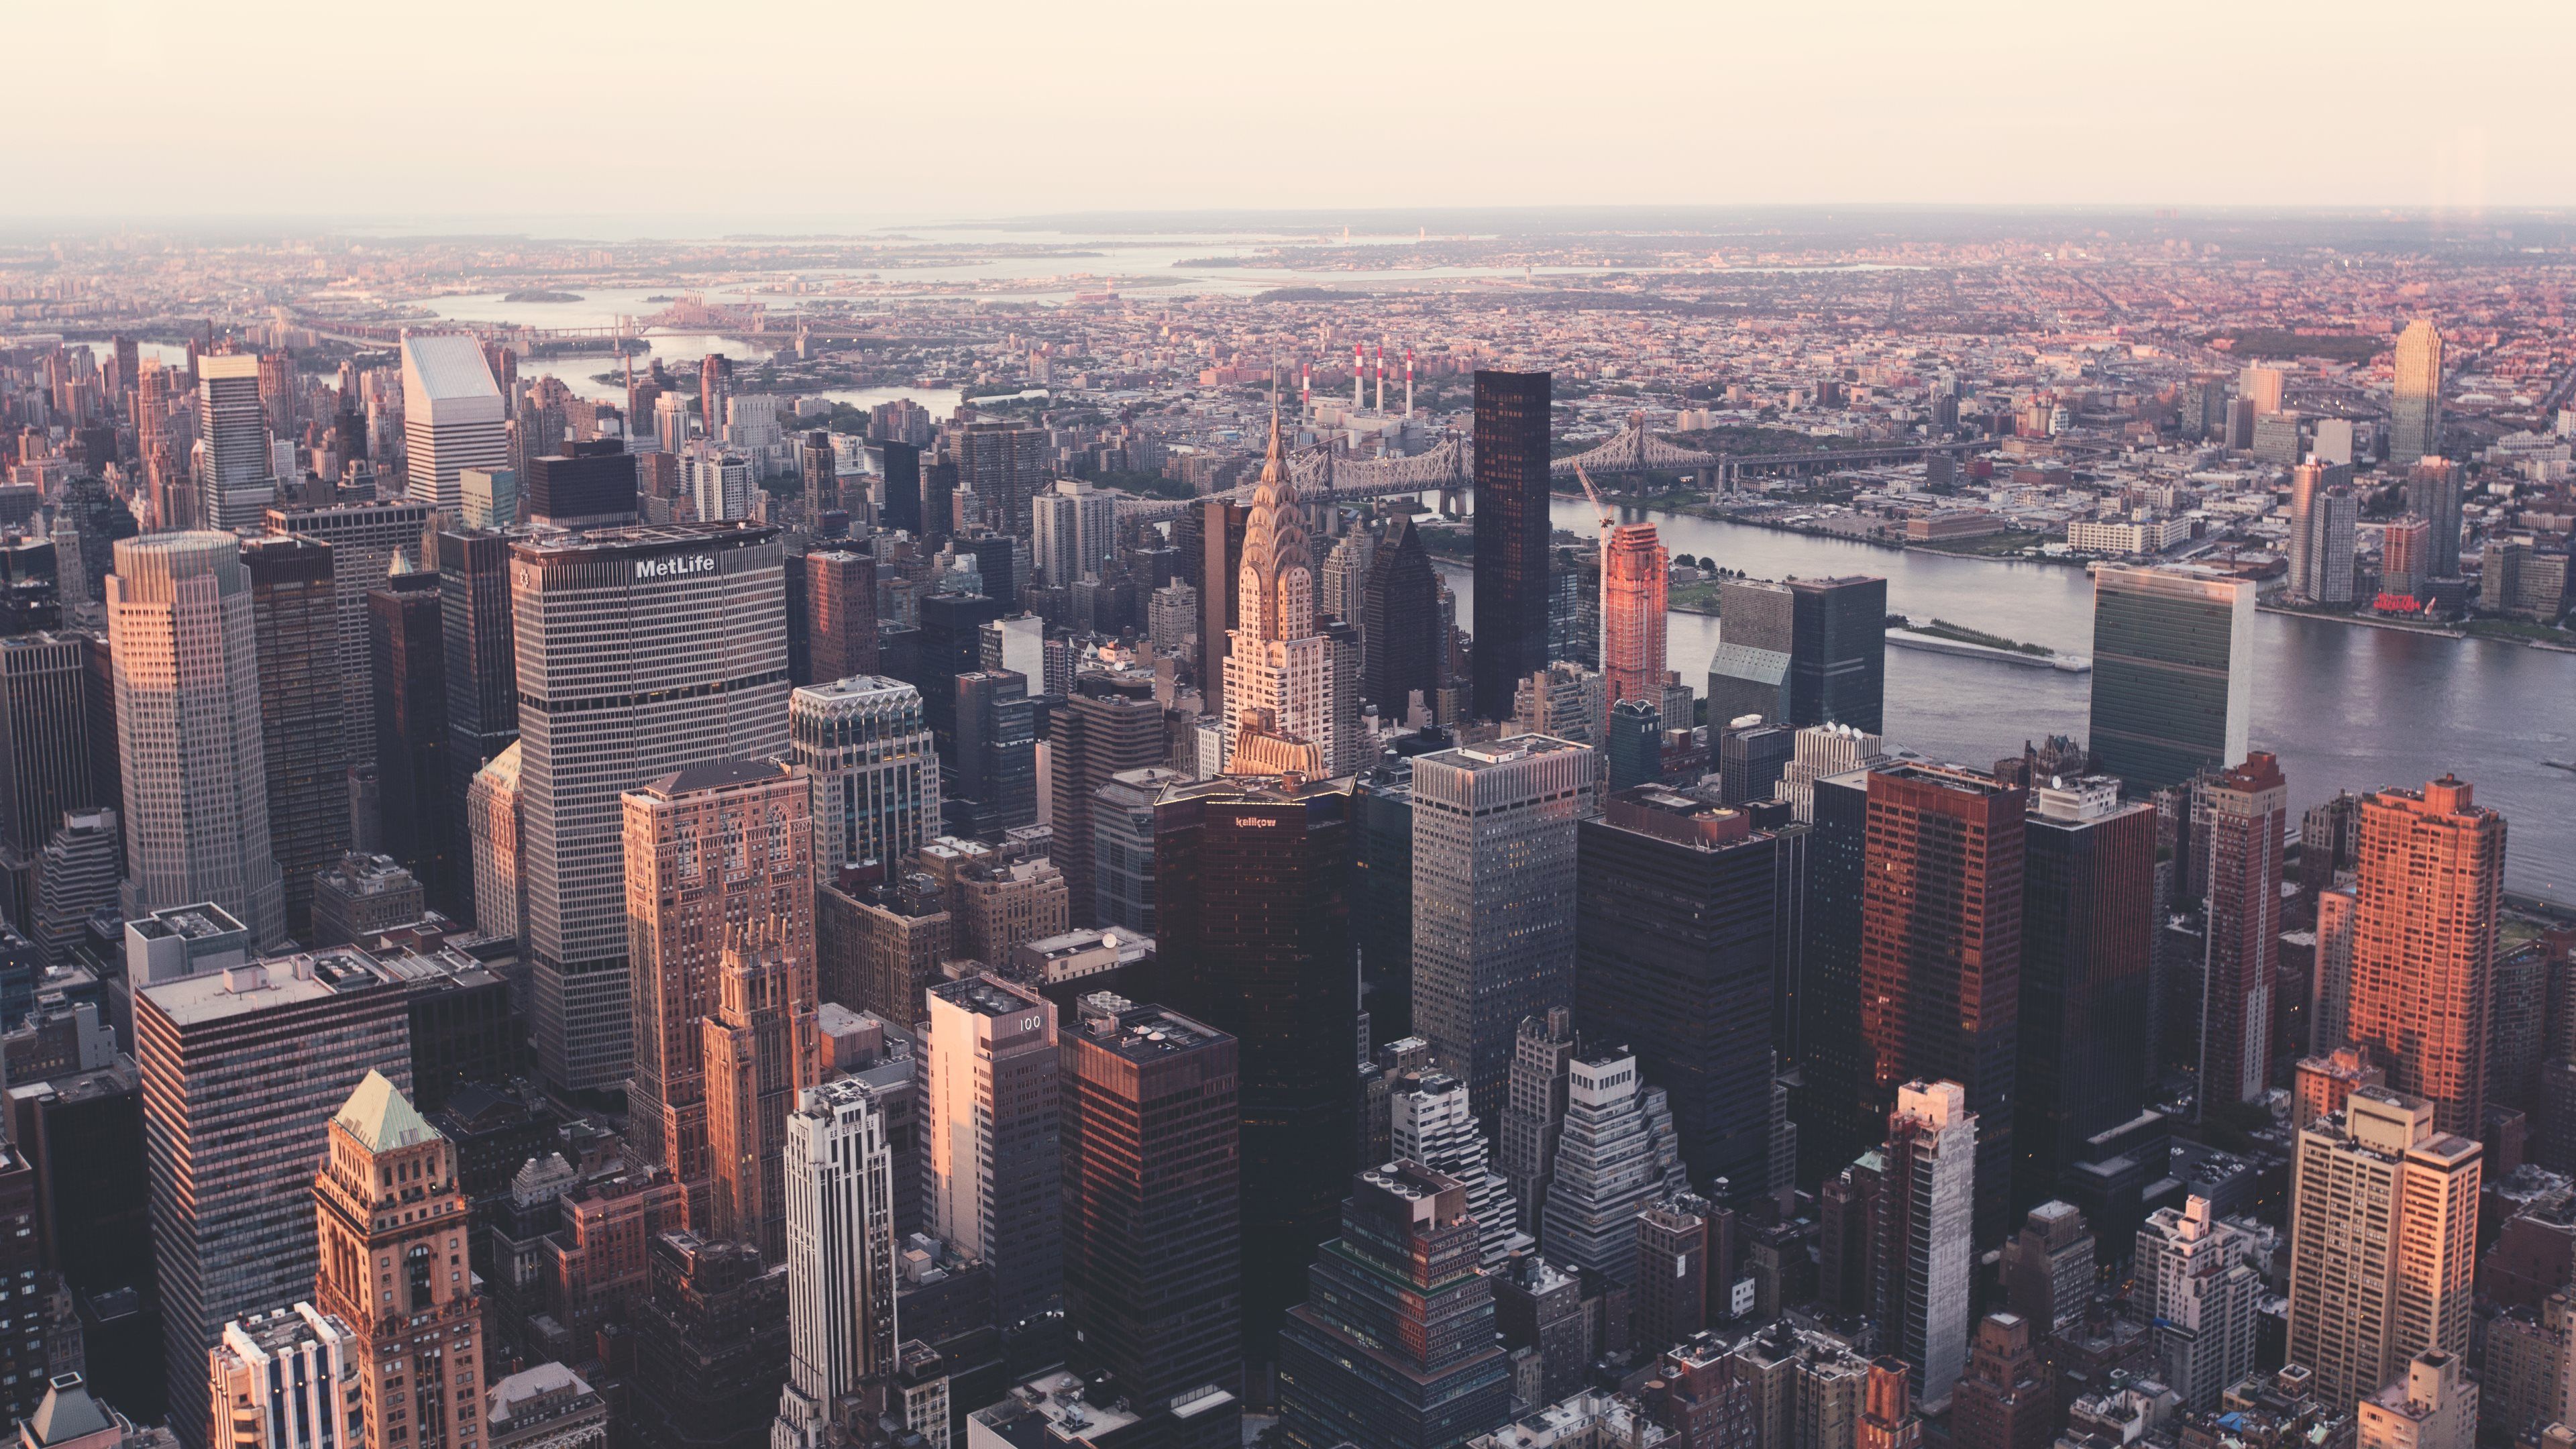 Iconic view of the New York City. 4k Ultra HD Wallpaper. Background